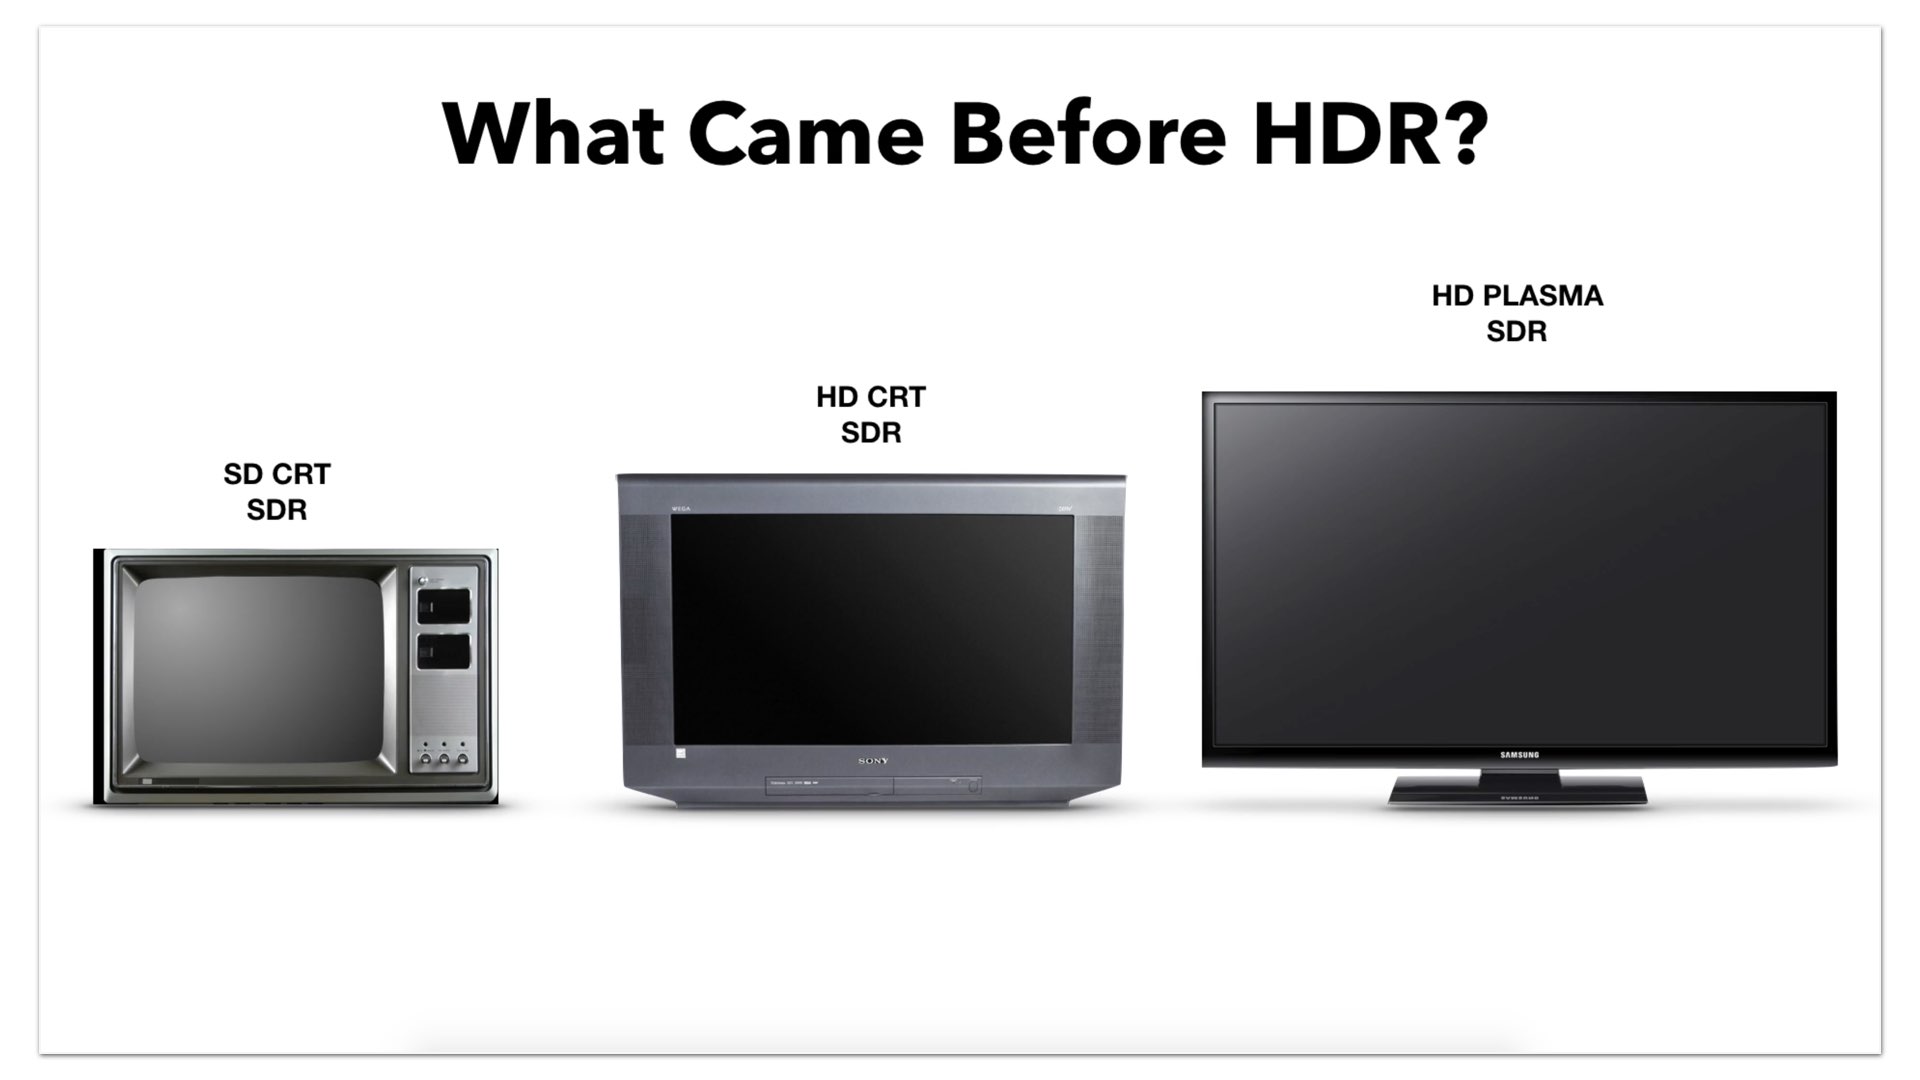 What came before HDR